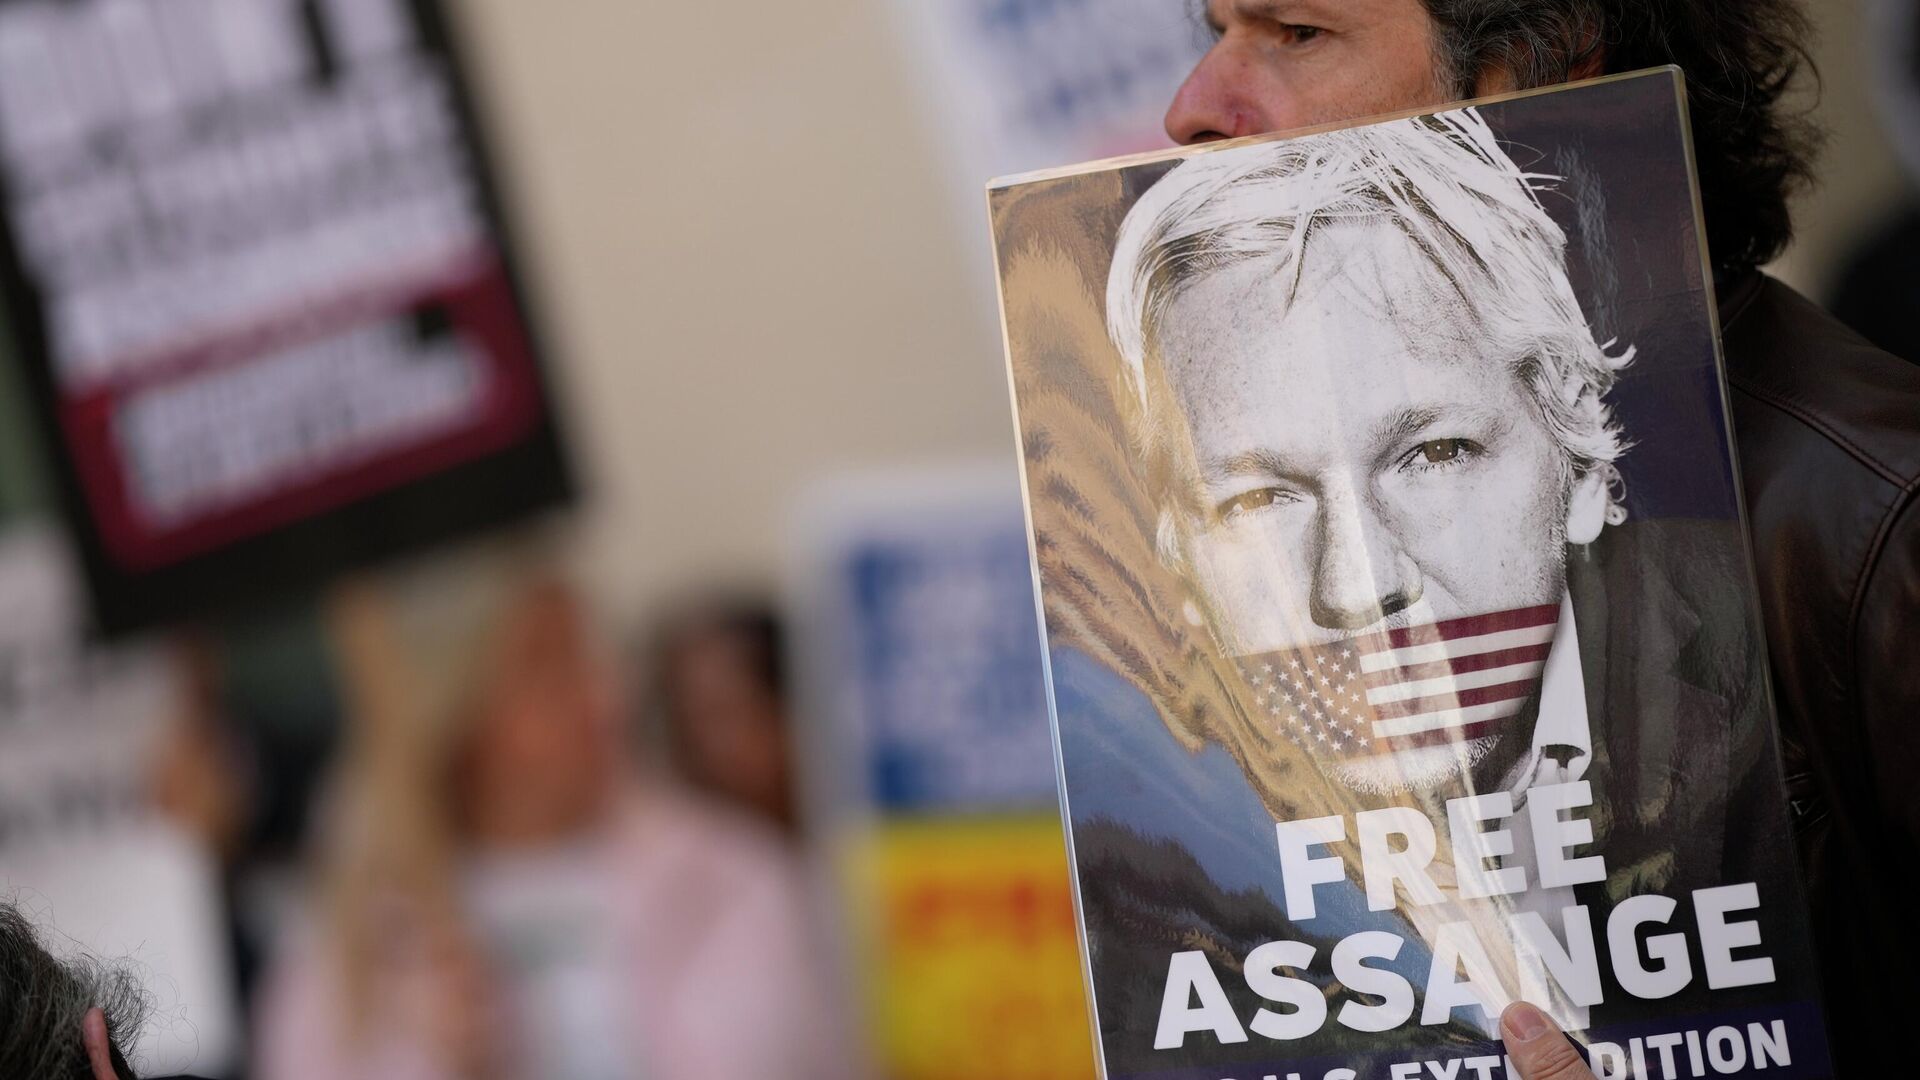 Wikileaks founder Julian Assange supporters hold placards as they gather outside Westminster Magistrates court In London, Wednesday, April 20, 2022. - Sputnik International, 1920, 18.05.2022